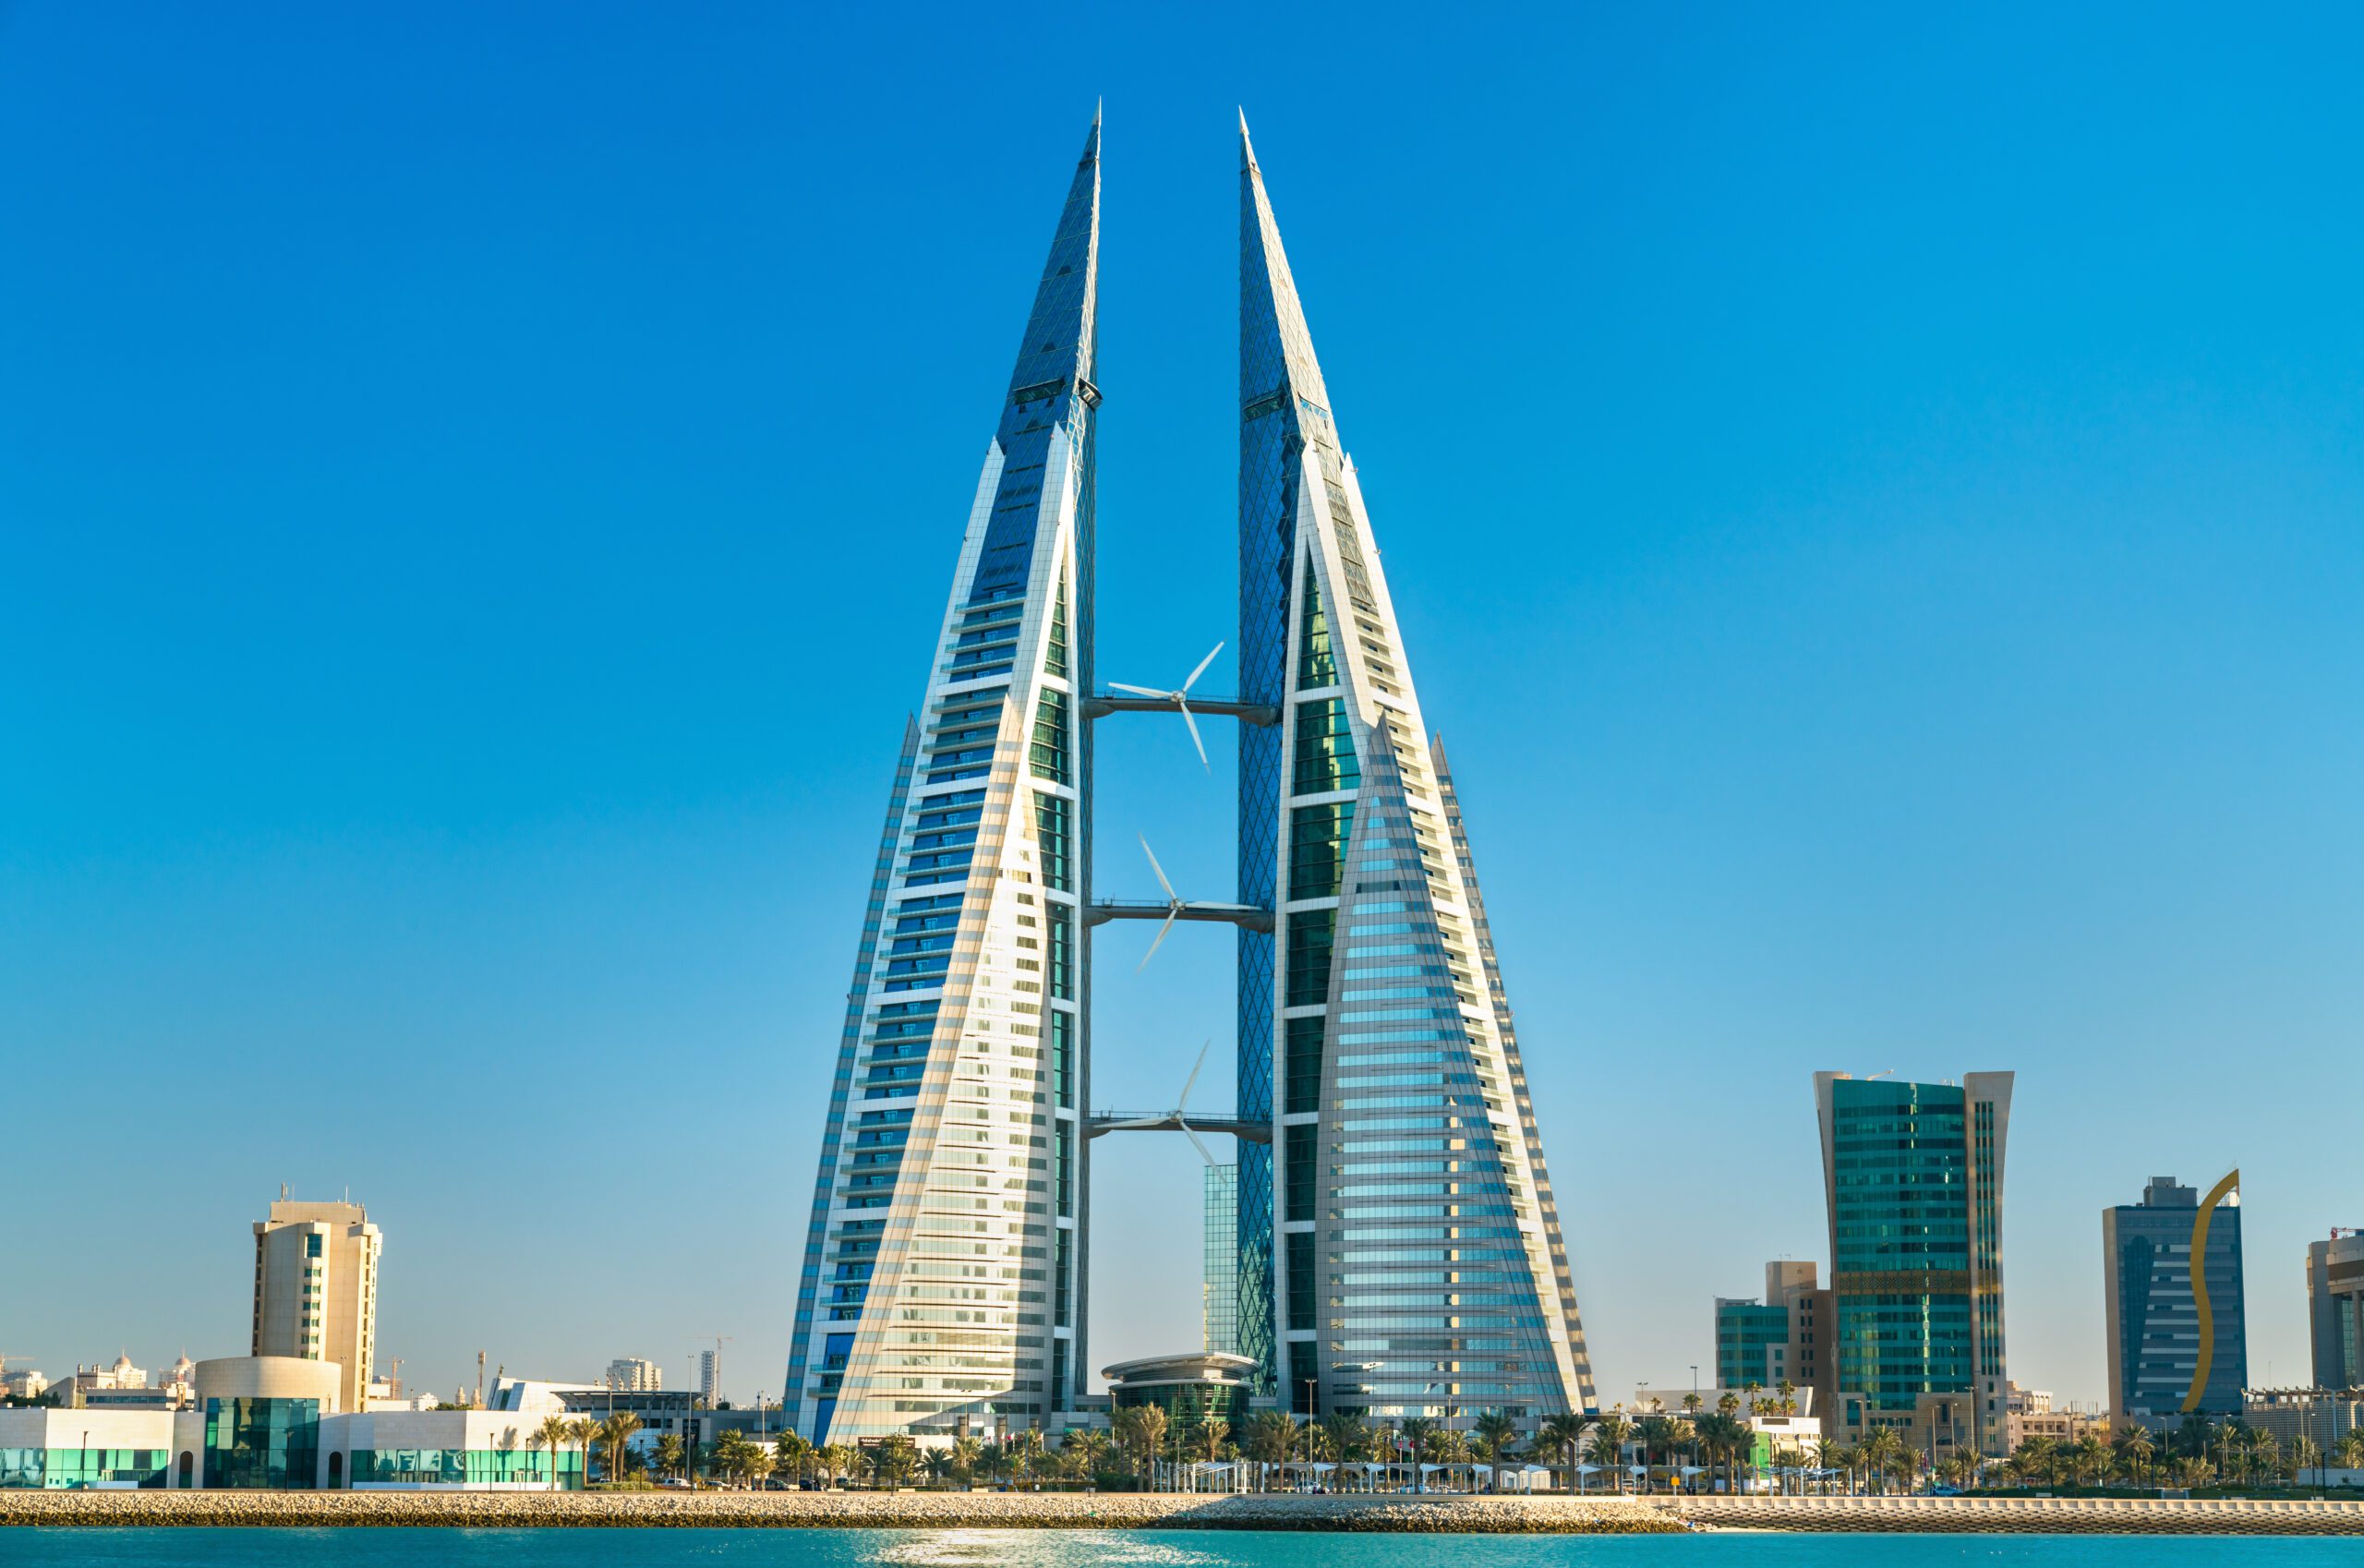 Bahrain World Trade Center in Manama. The Middle East